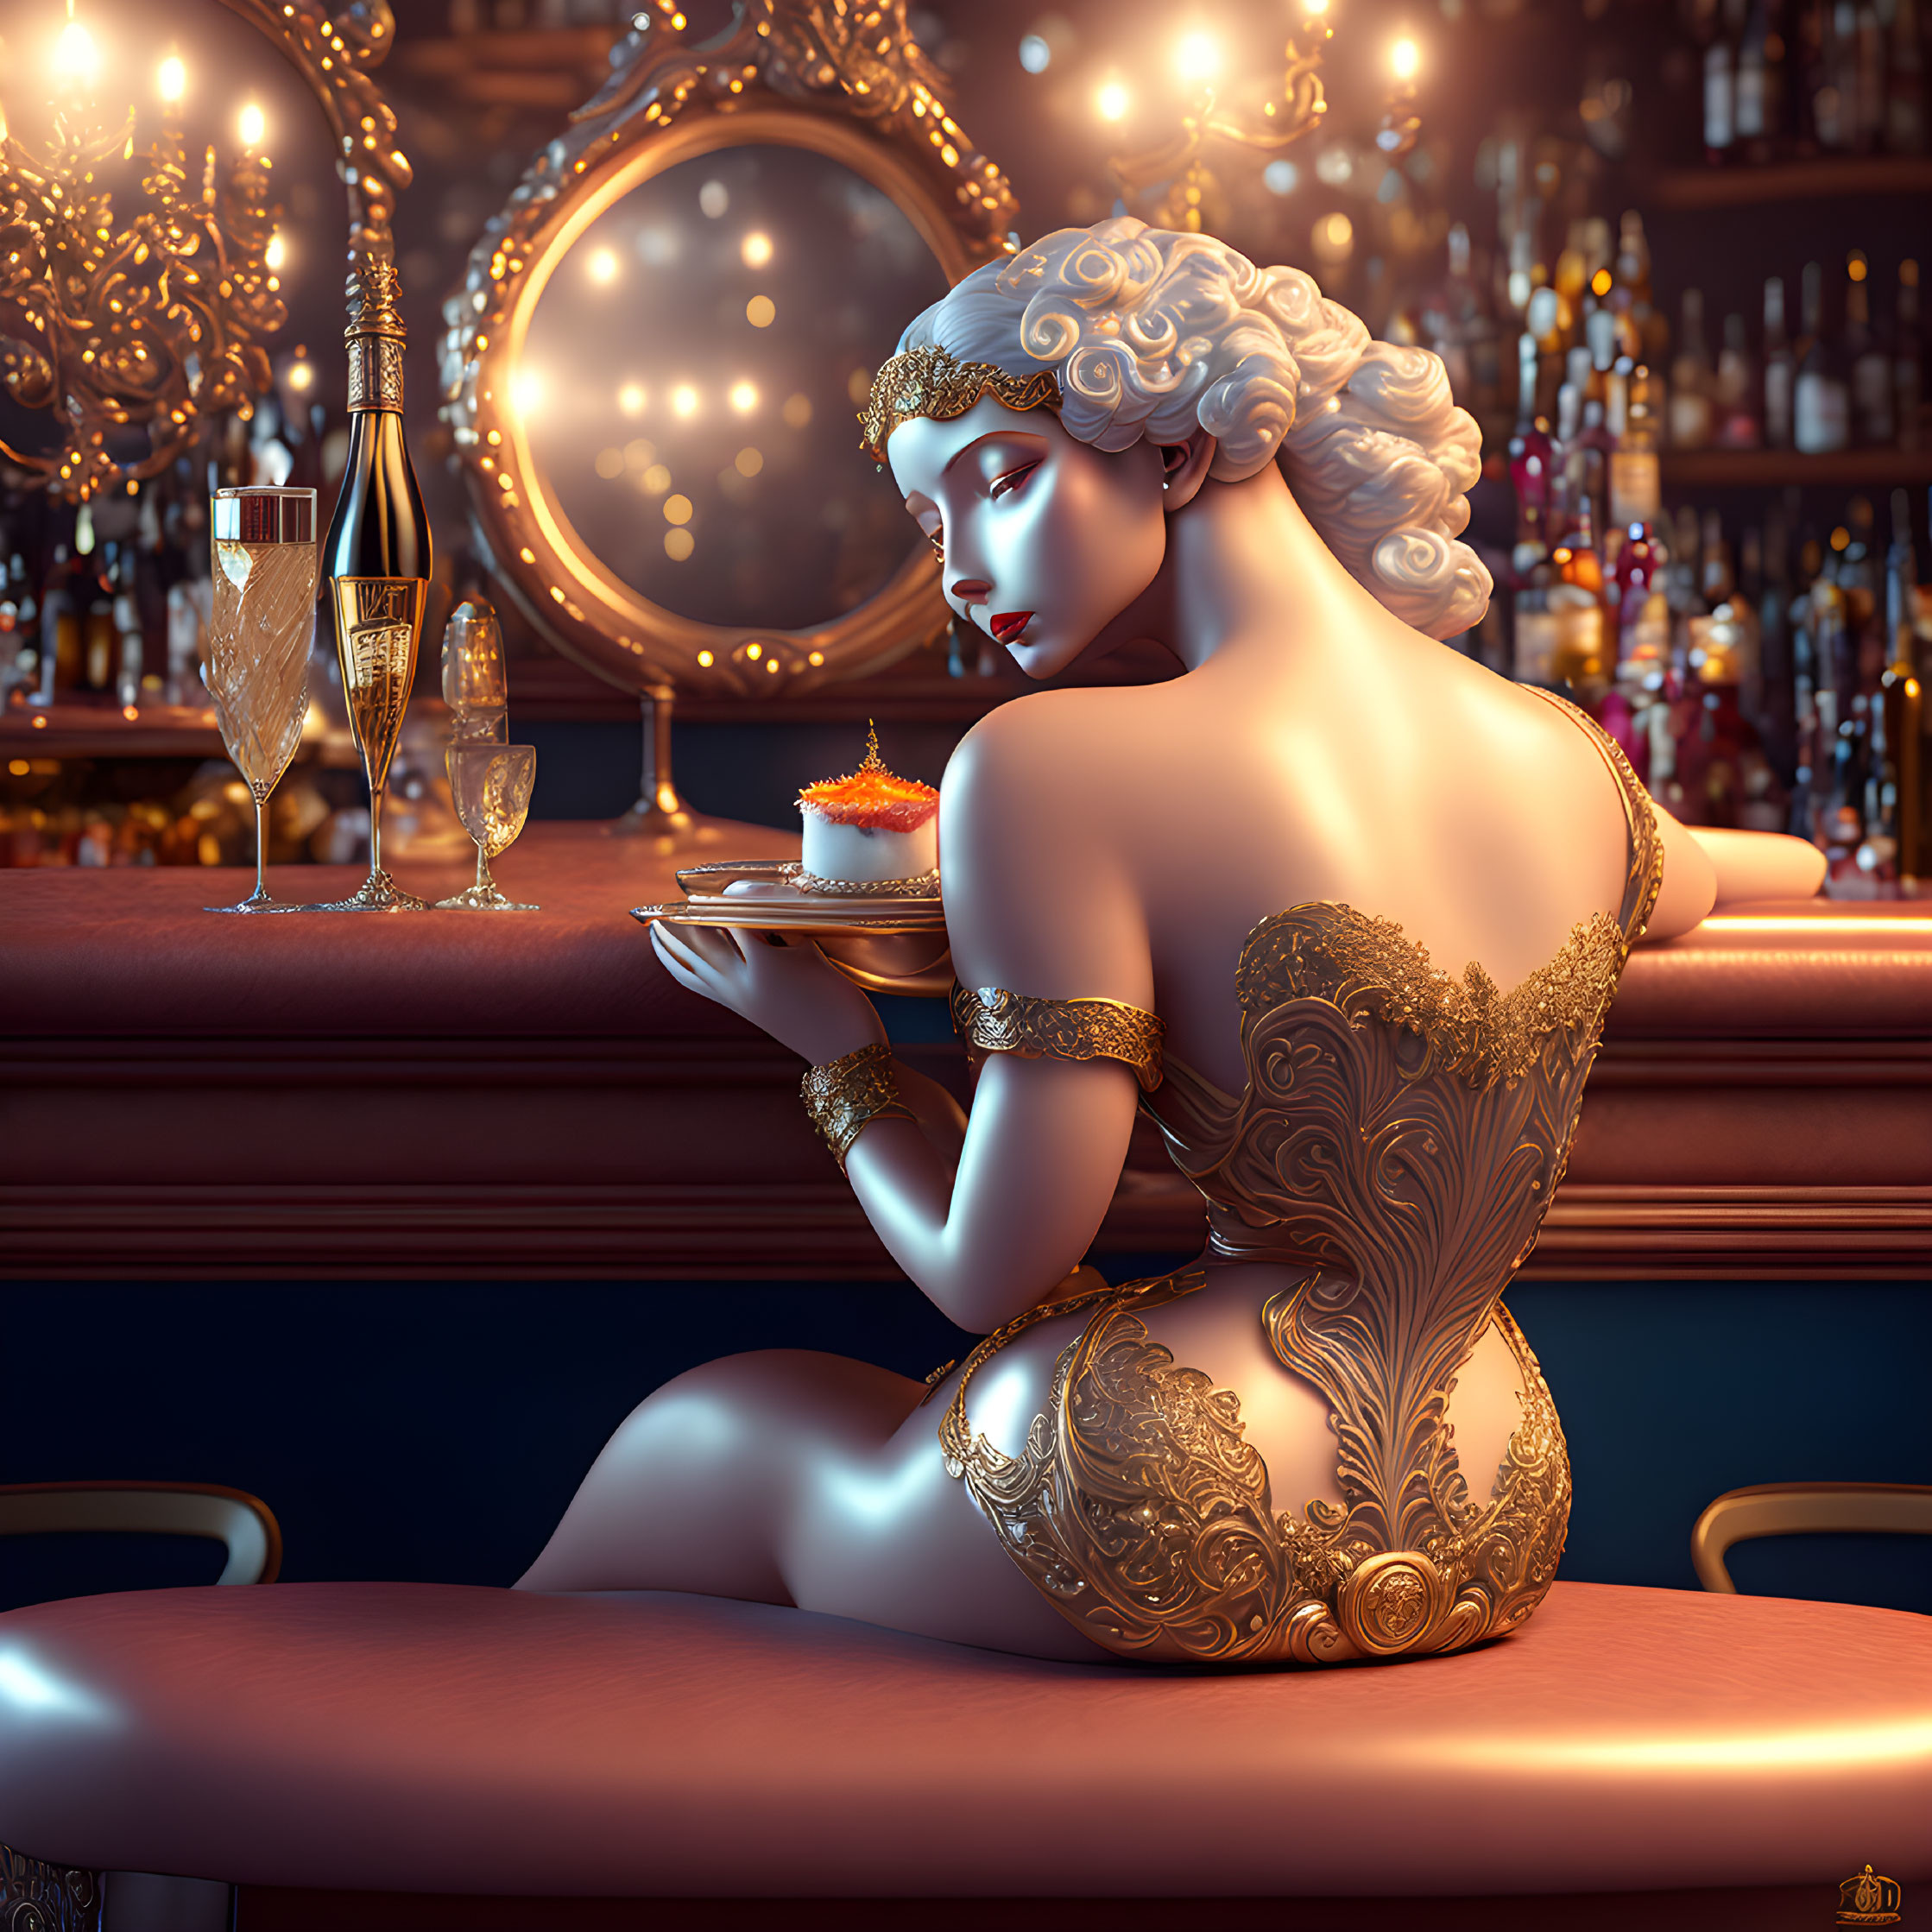 Stylized female figure in golden attire at bar with drink and dessert